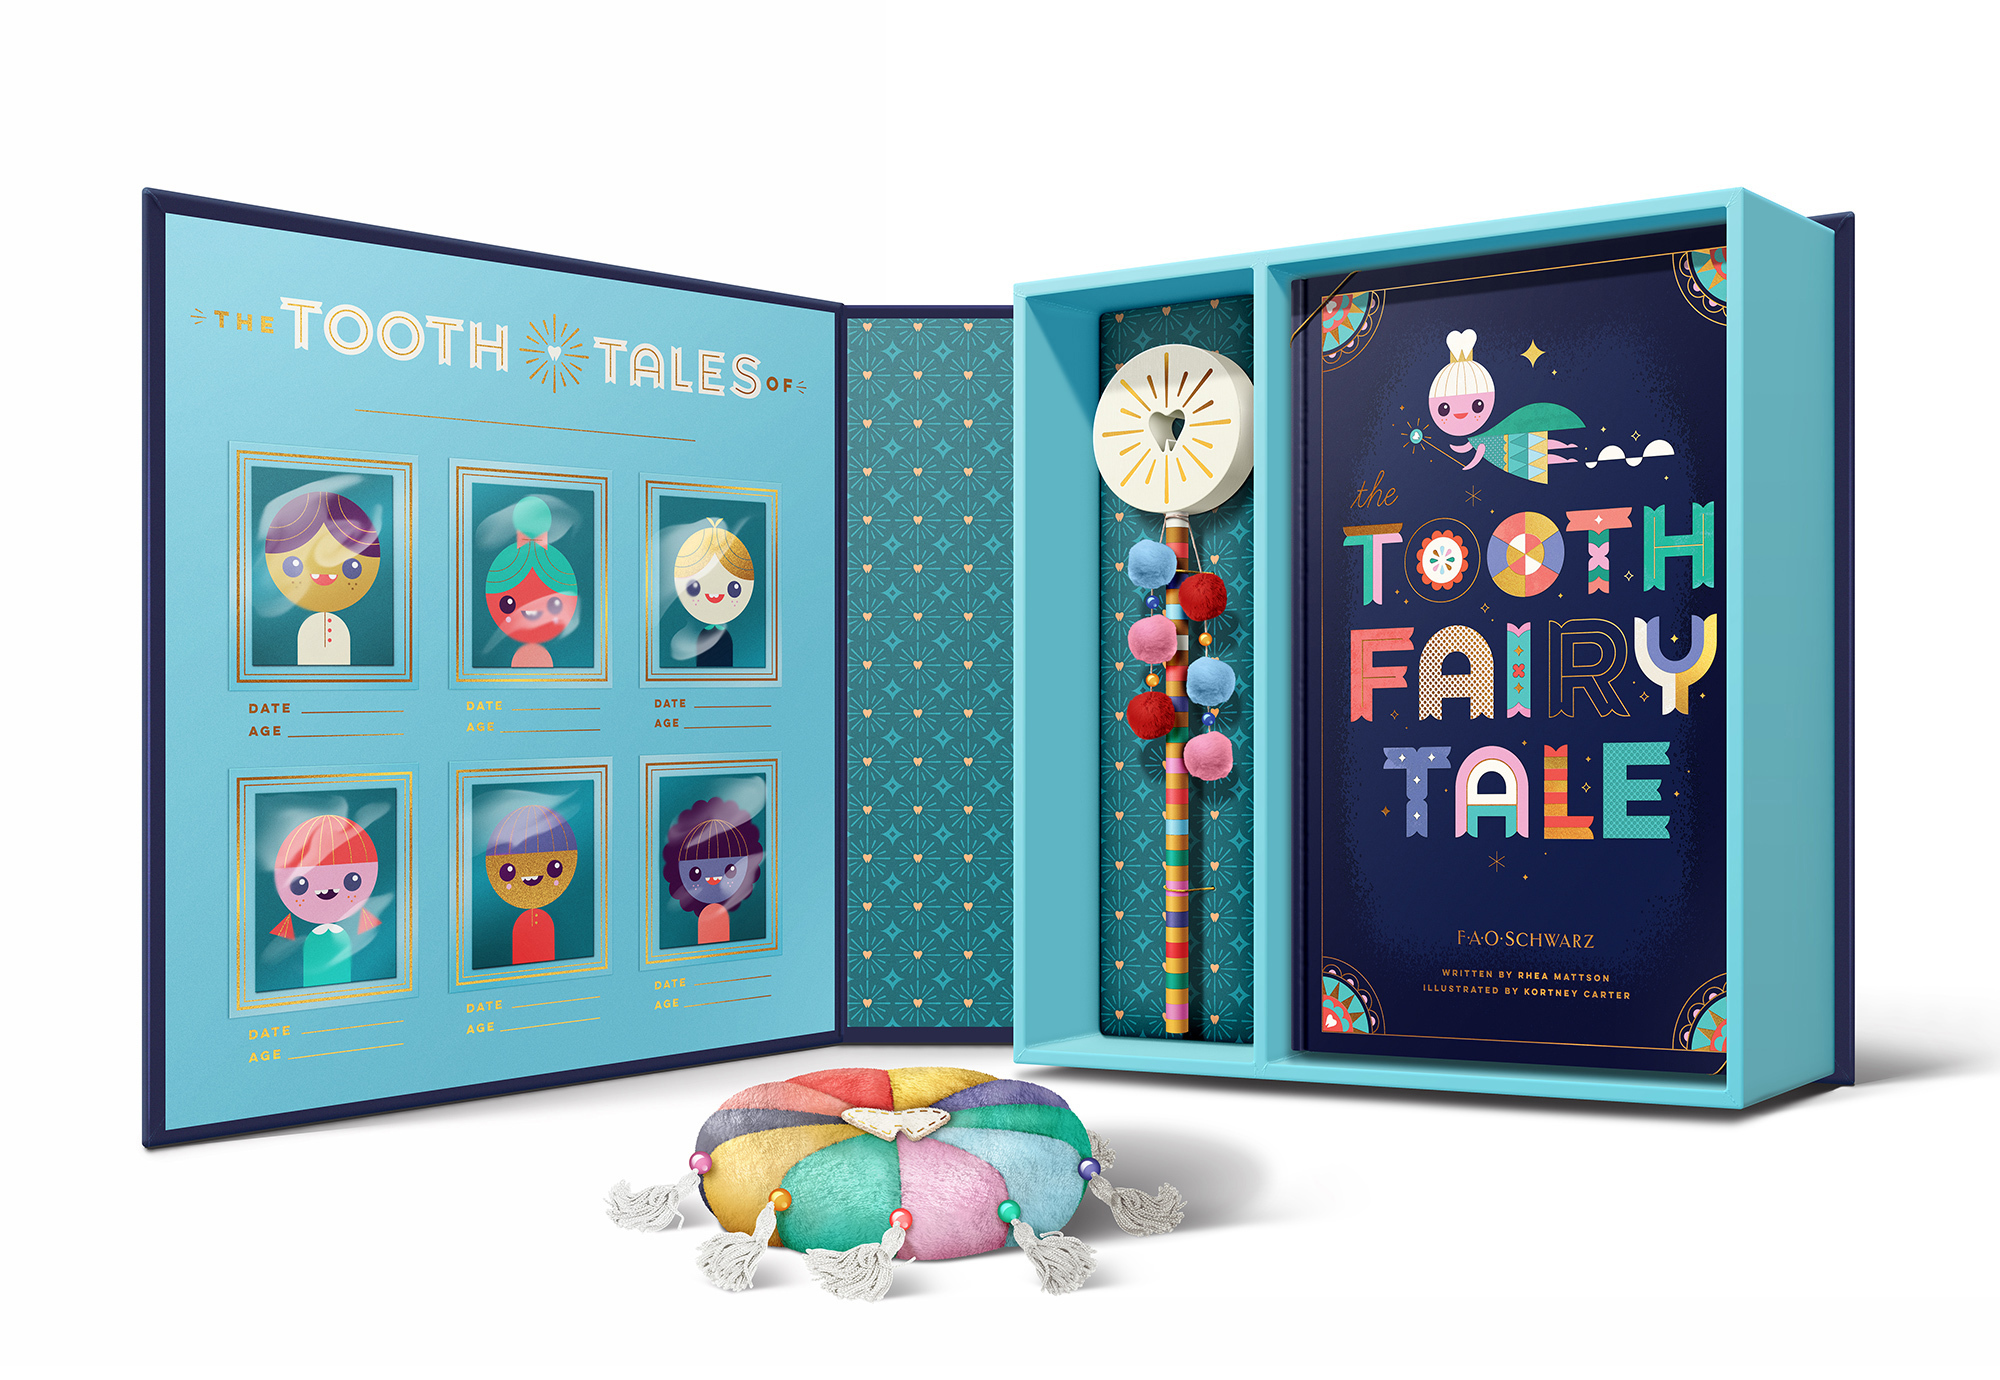 FAO Schwarz Tooth Fairy Tale Book and Keepsake Box Fairy Wand and Scrapbook Includes Tooth Pillow First Lost Tooth Diary Save Images of Your Child Written by Rhea Mattson 